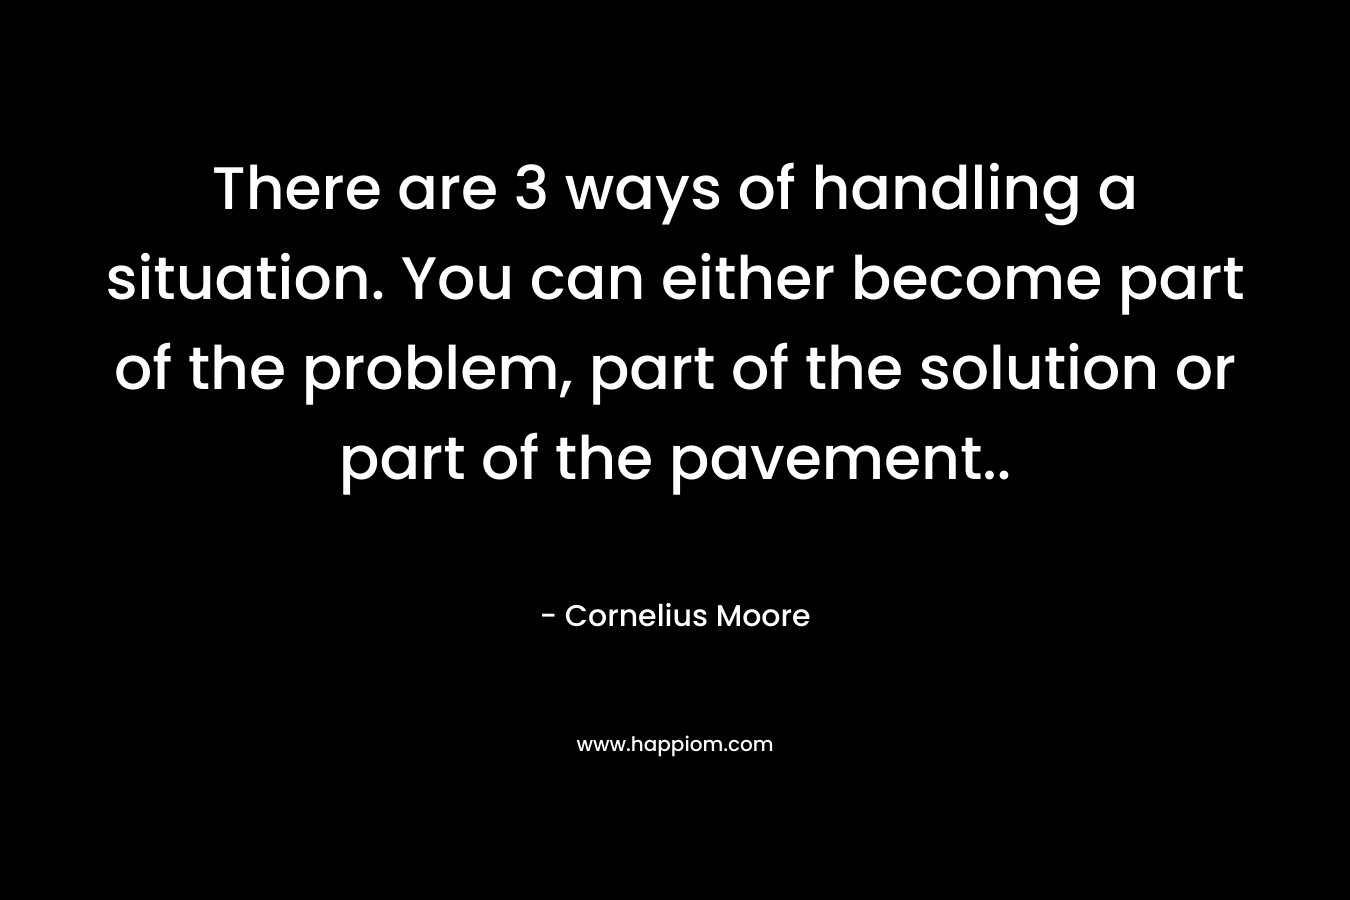 There are 3 ways of handling a situation. You can either become part of the problem, part of the solution or part of the pavement.. – Cornelius Moore